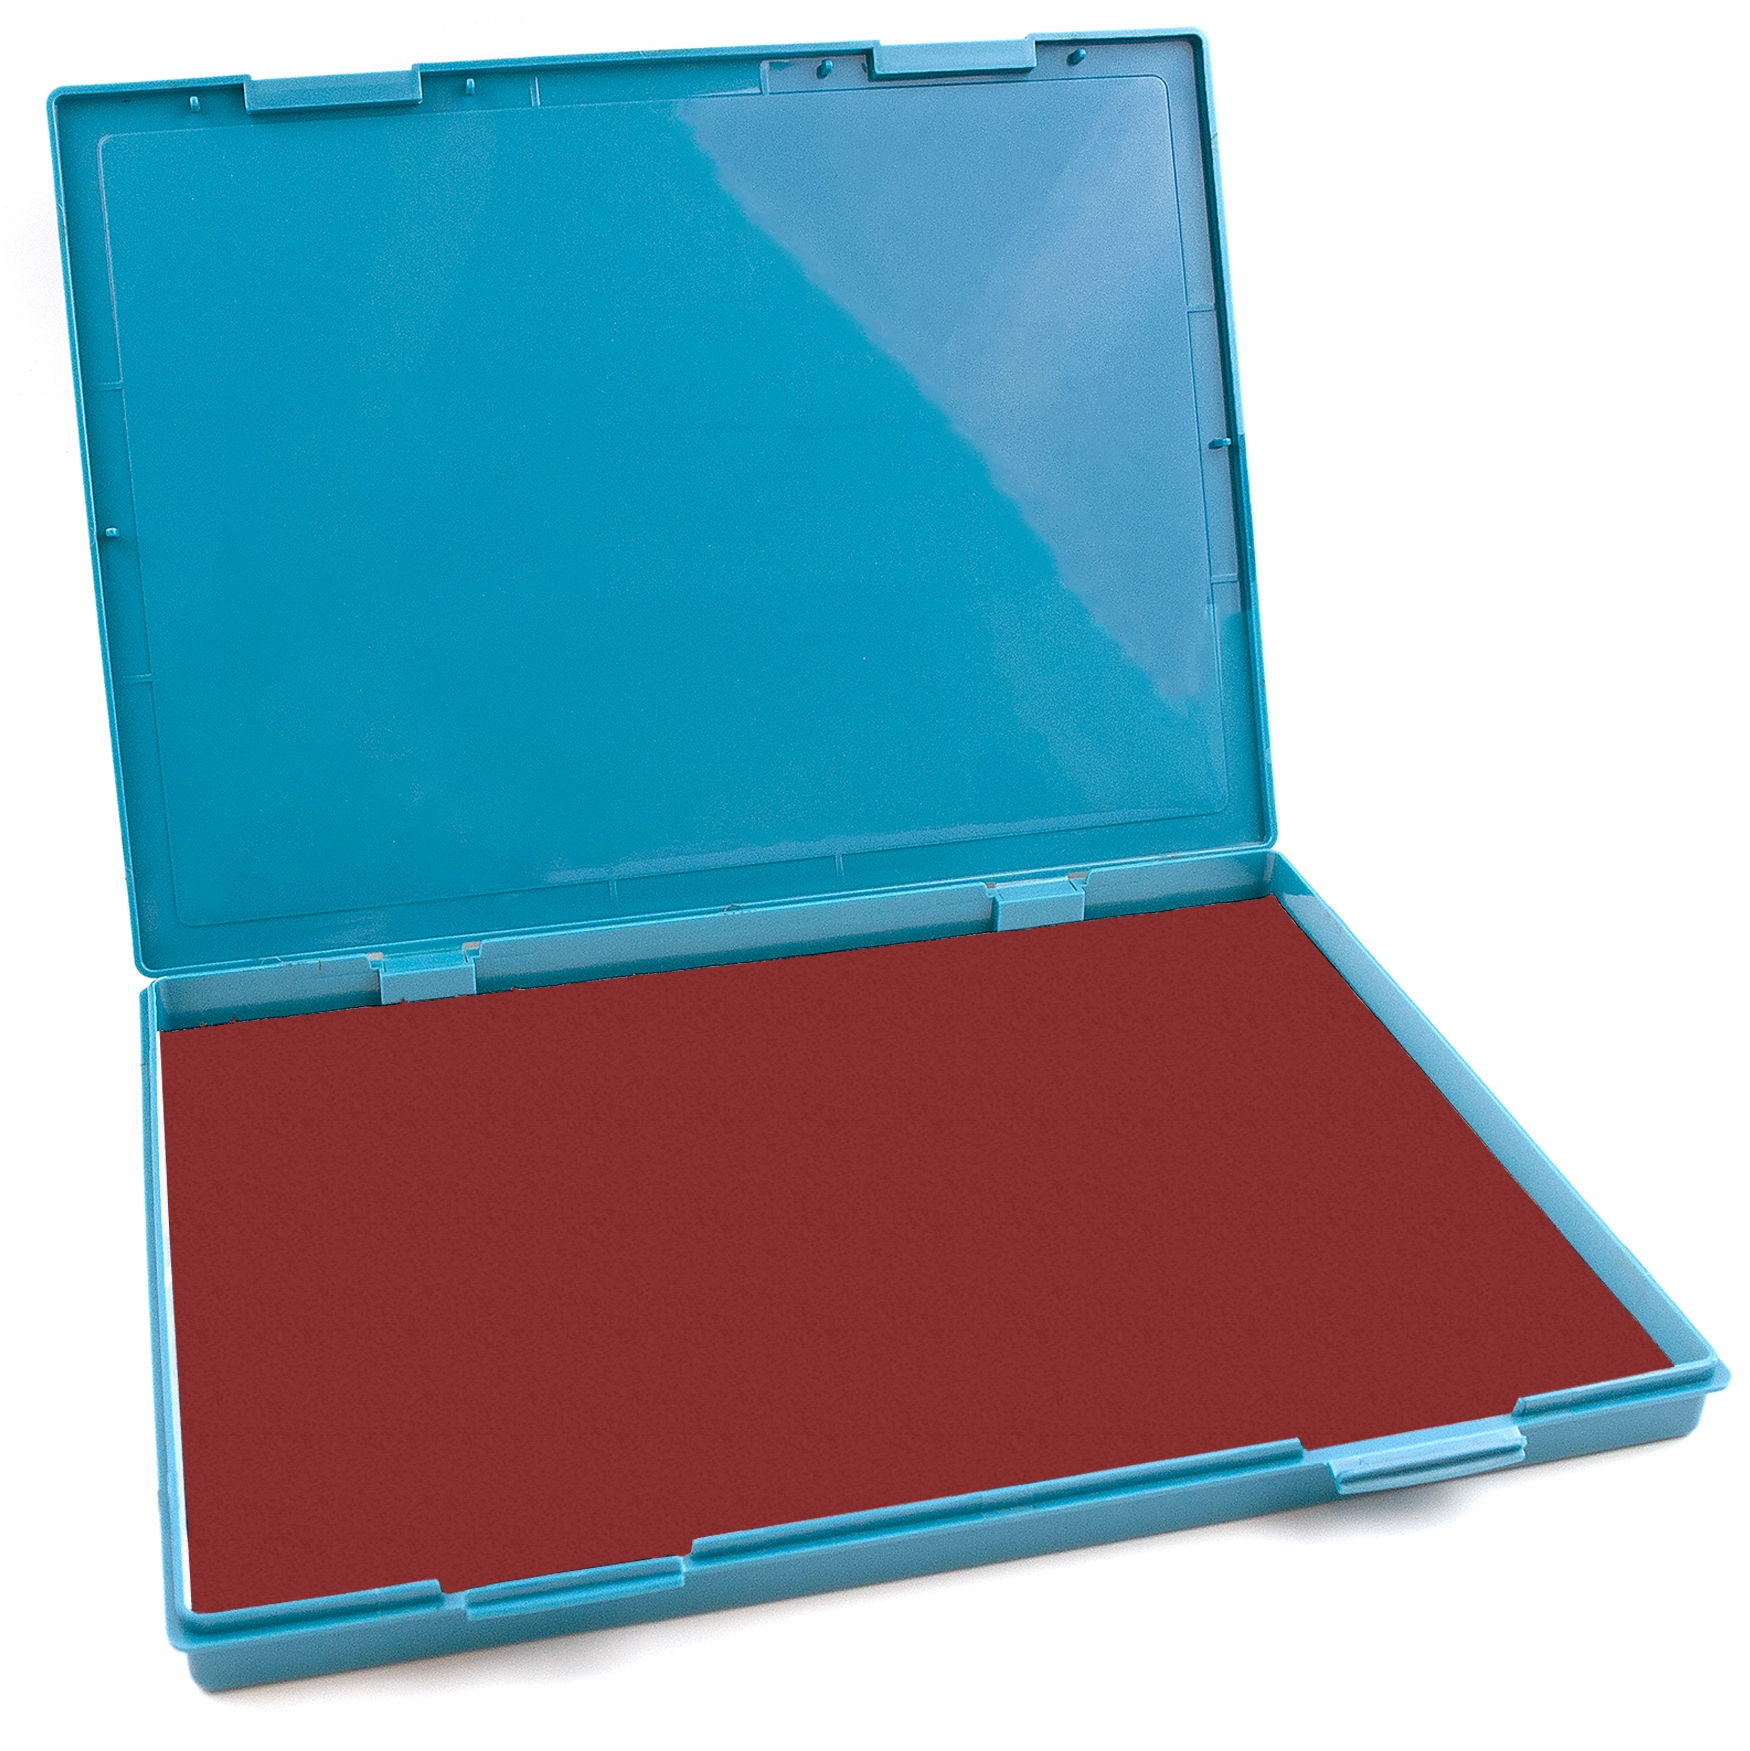 Extra Large Crimson Red Ink Stamp Pad - 8.25" x 11.5" - Industrial Felt Pad